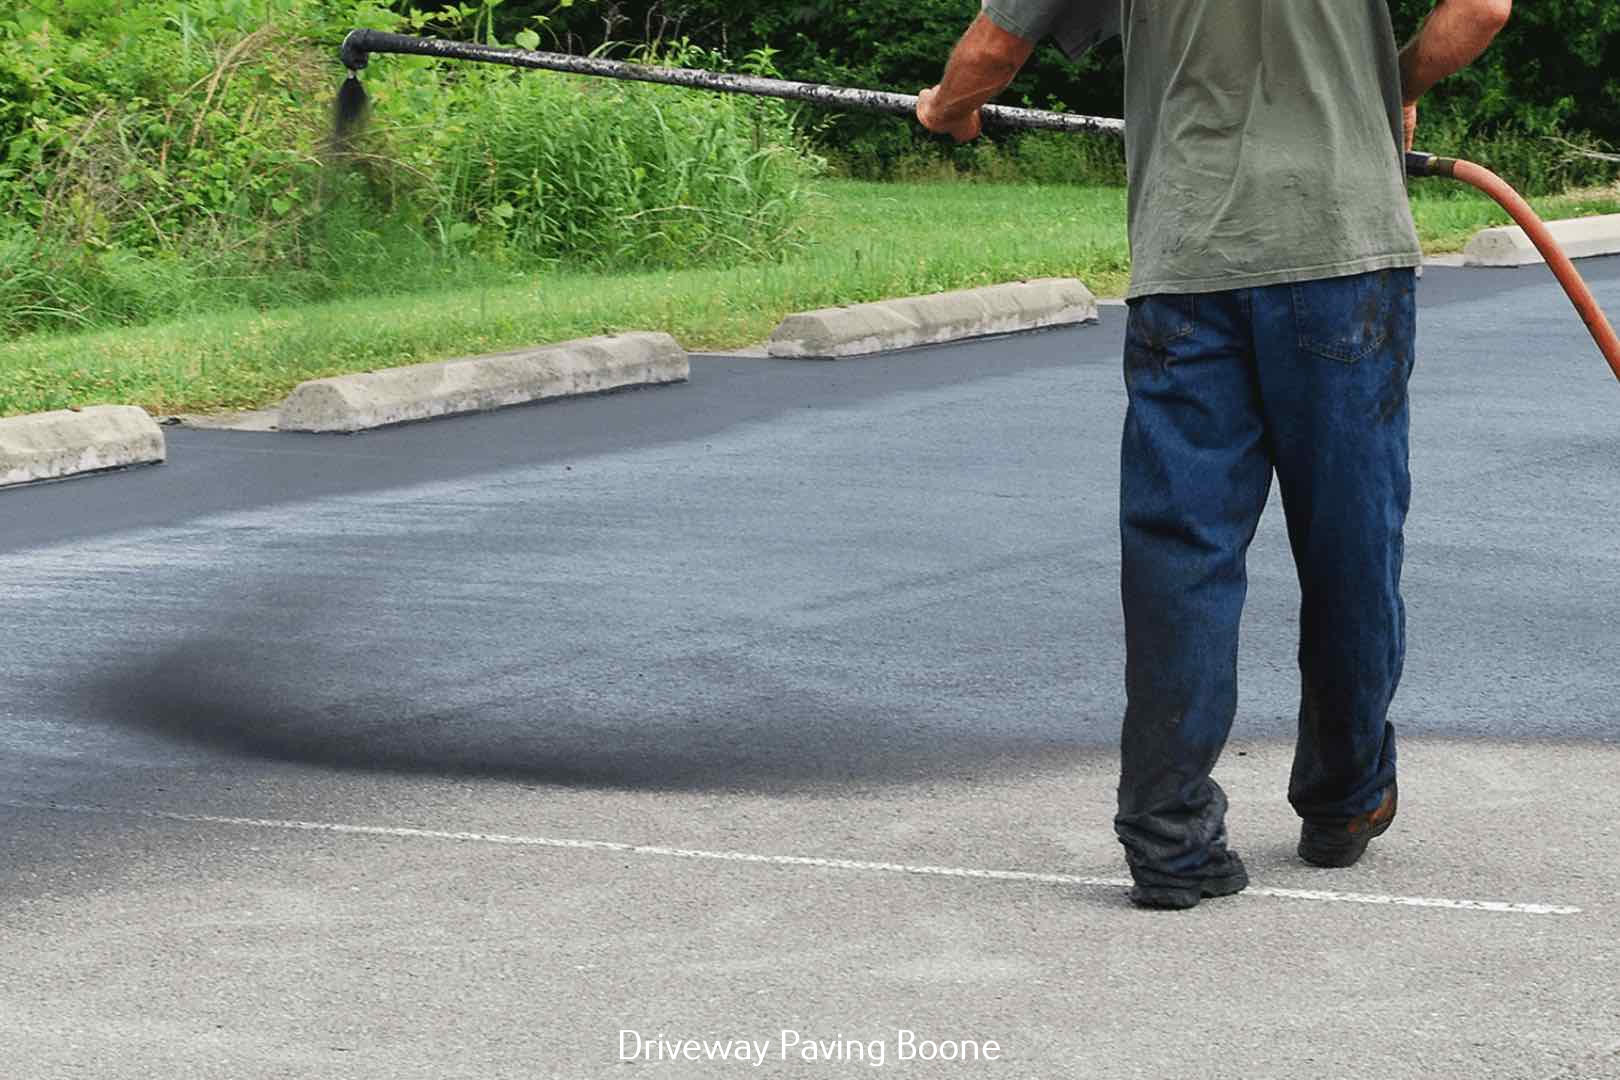 Platinum Paving Outlines Sustainable Practices in Asphalt Paving for Environmental Responsibility